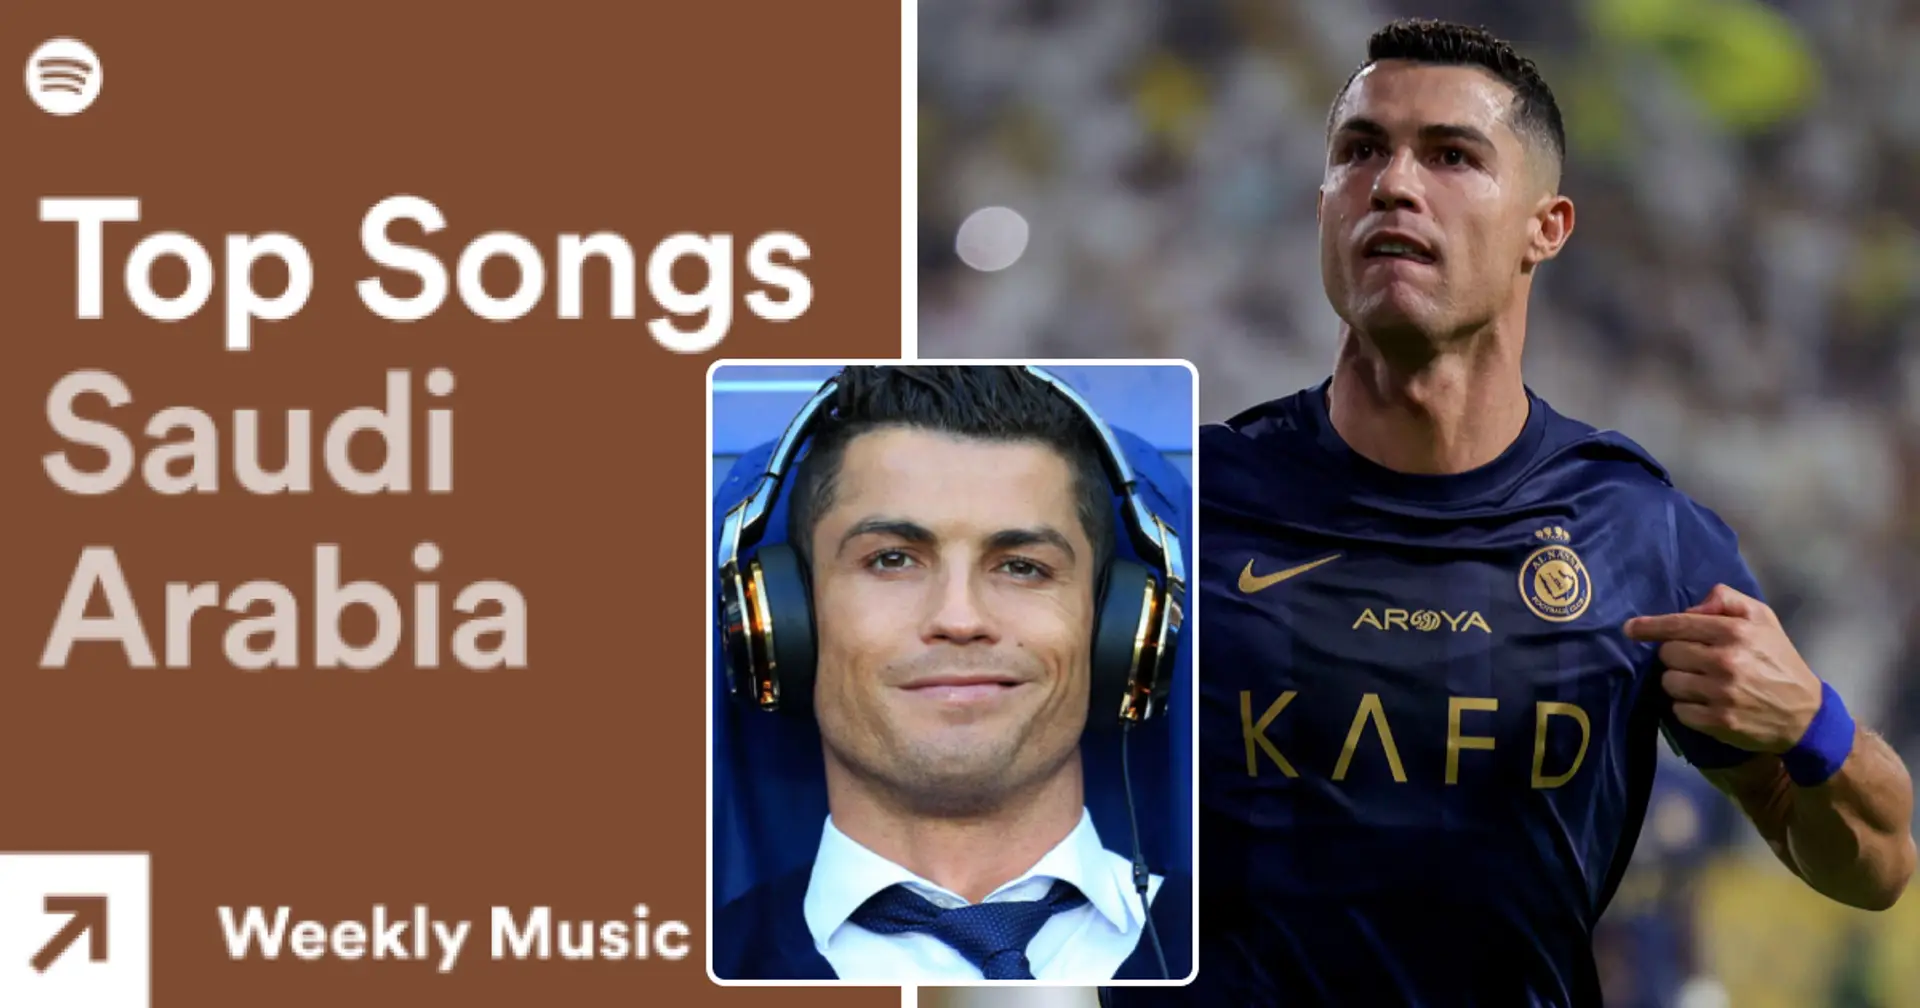 Cristiano Ronaldo helps a 2007 track become the number one song in